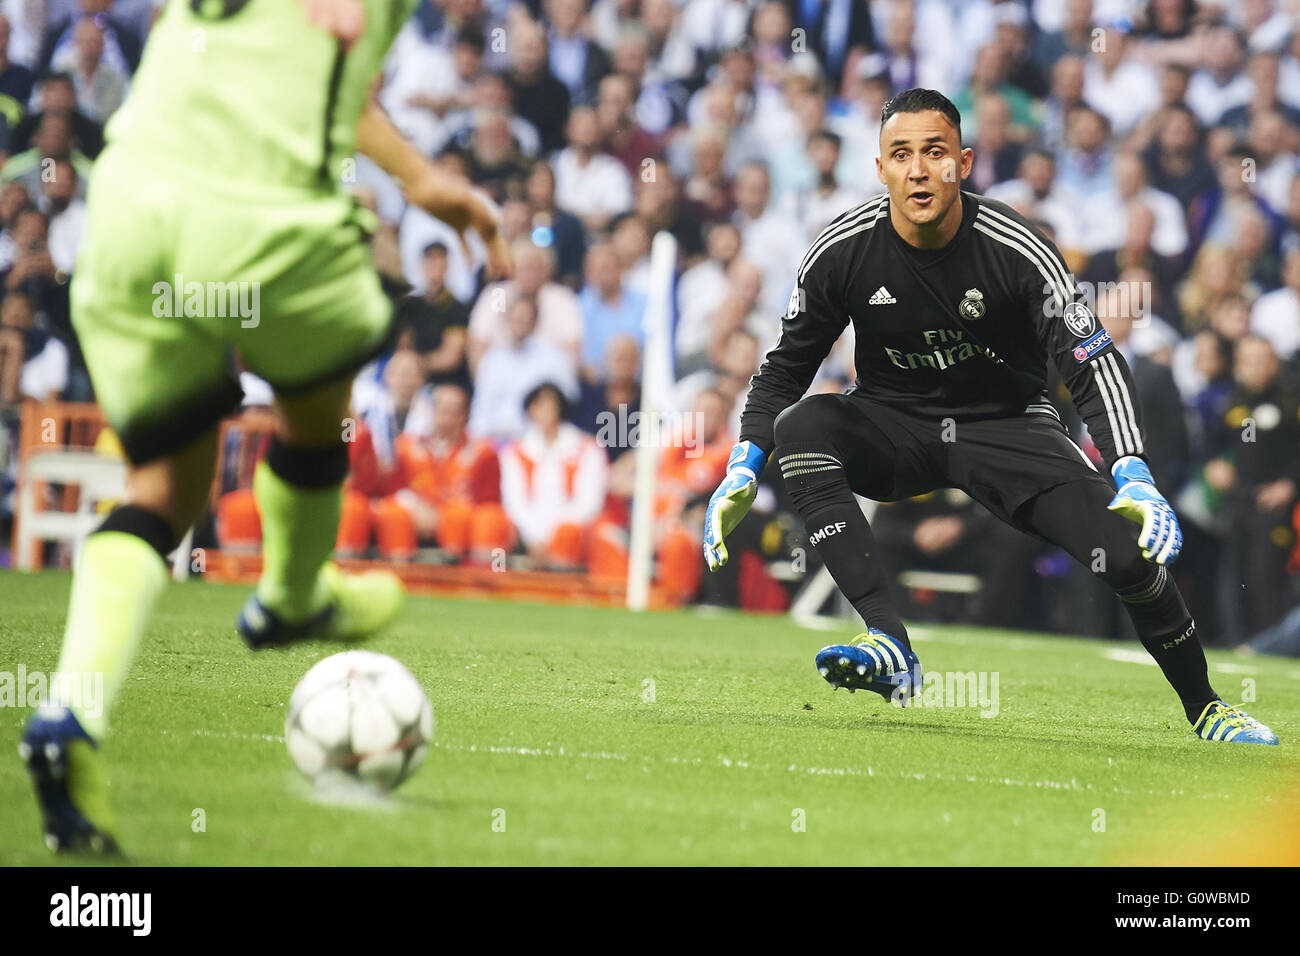 Madrid, Spain. 4th May, 2016. Keylor Navas (goalkeeper; Real Madrid), Bacary Sagna (defender; Manchester City FC) in action during the UEFA Champions League match between Real Madrid and Manchester City FC at Santiago Bernabeu on May 4, 2016 in Madrid Credit:  Jack Abuin/ZUMA Wire/Alamy Live News Stock Photo